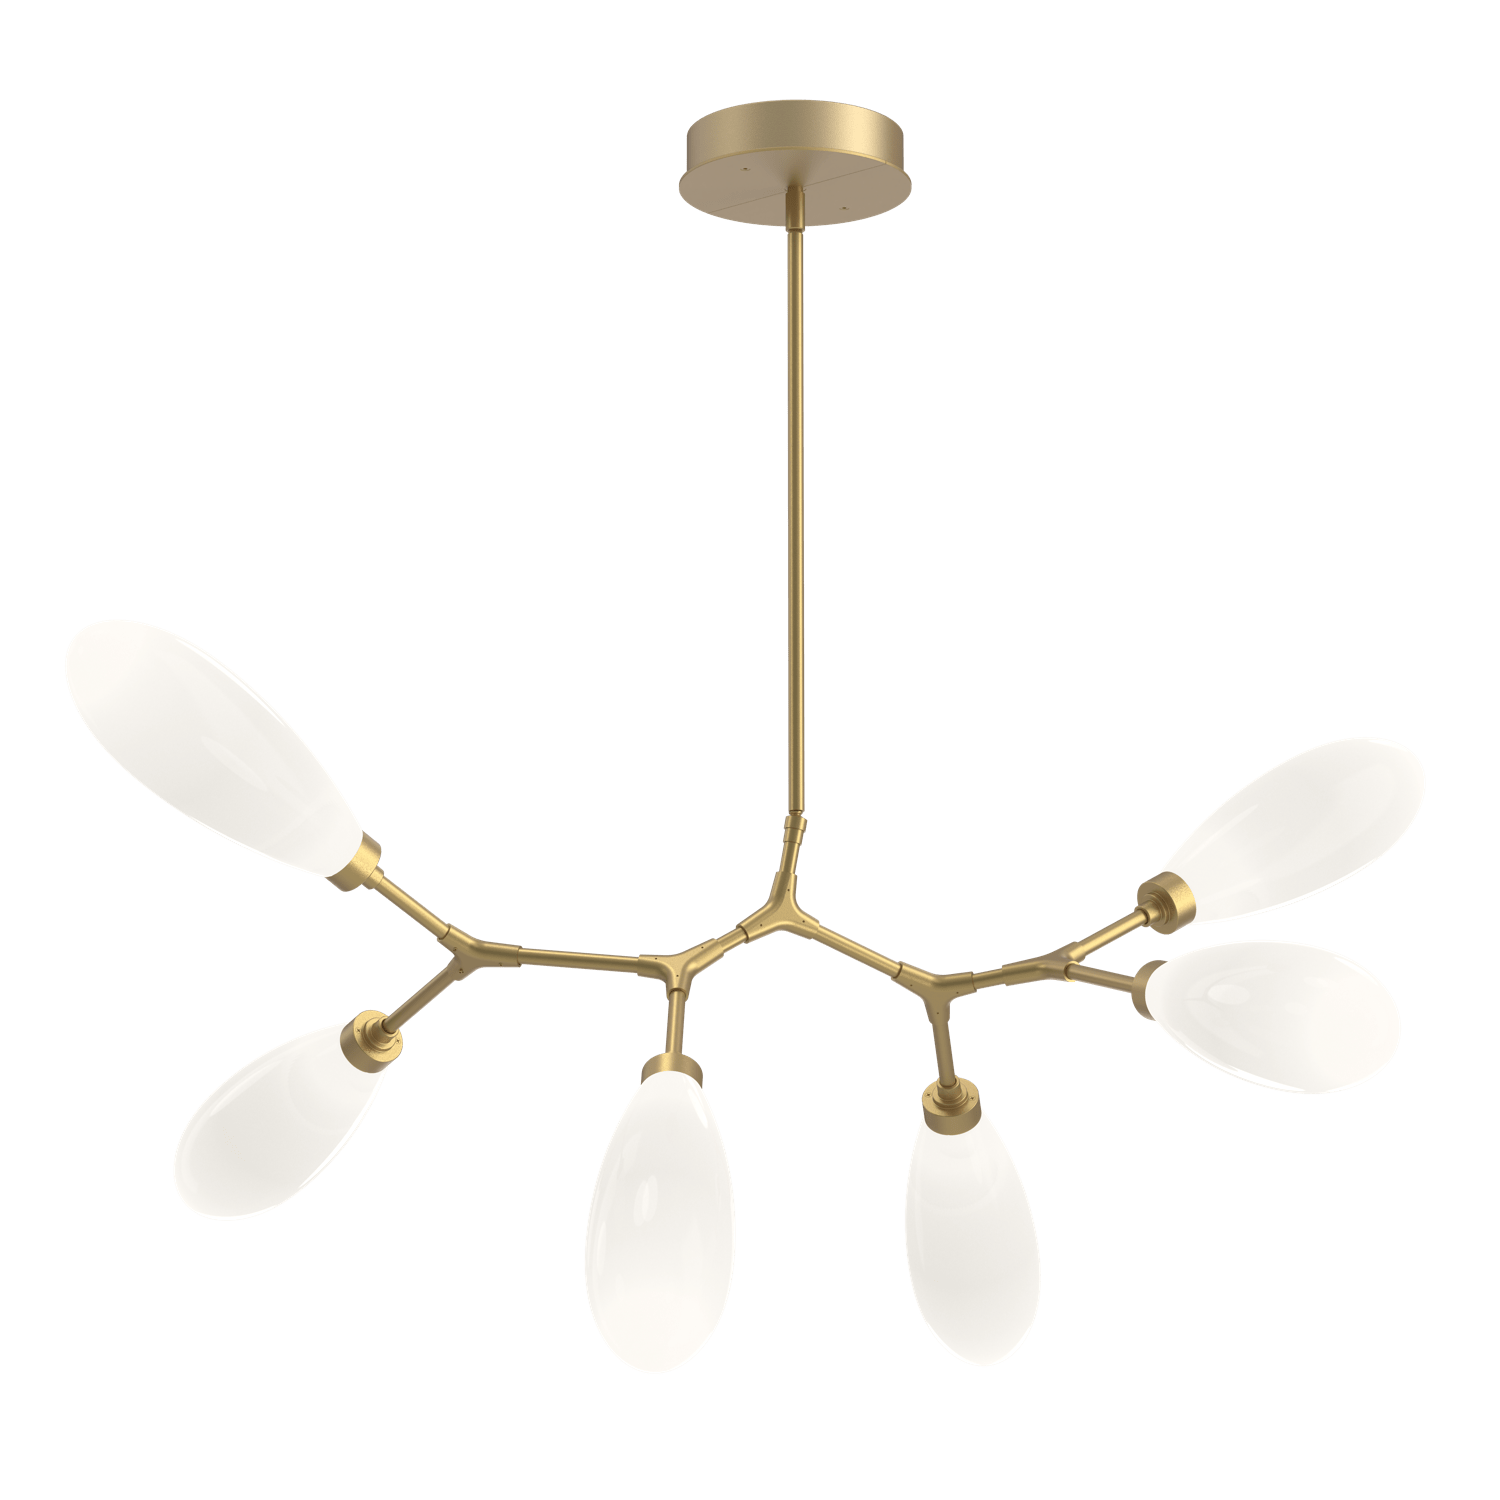 PLB0071-BA-GB-WL-LL-Hammerton-Studio-Fiori-6-light-organic-branch-chandelier-with-gilded-brass-finish-and-opal-white-glass-shades-and-LED-lamping